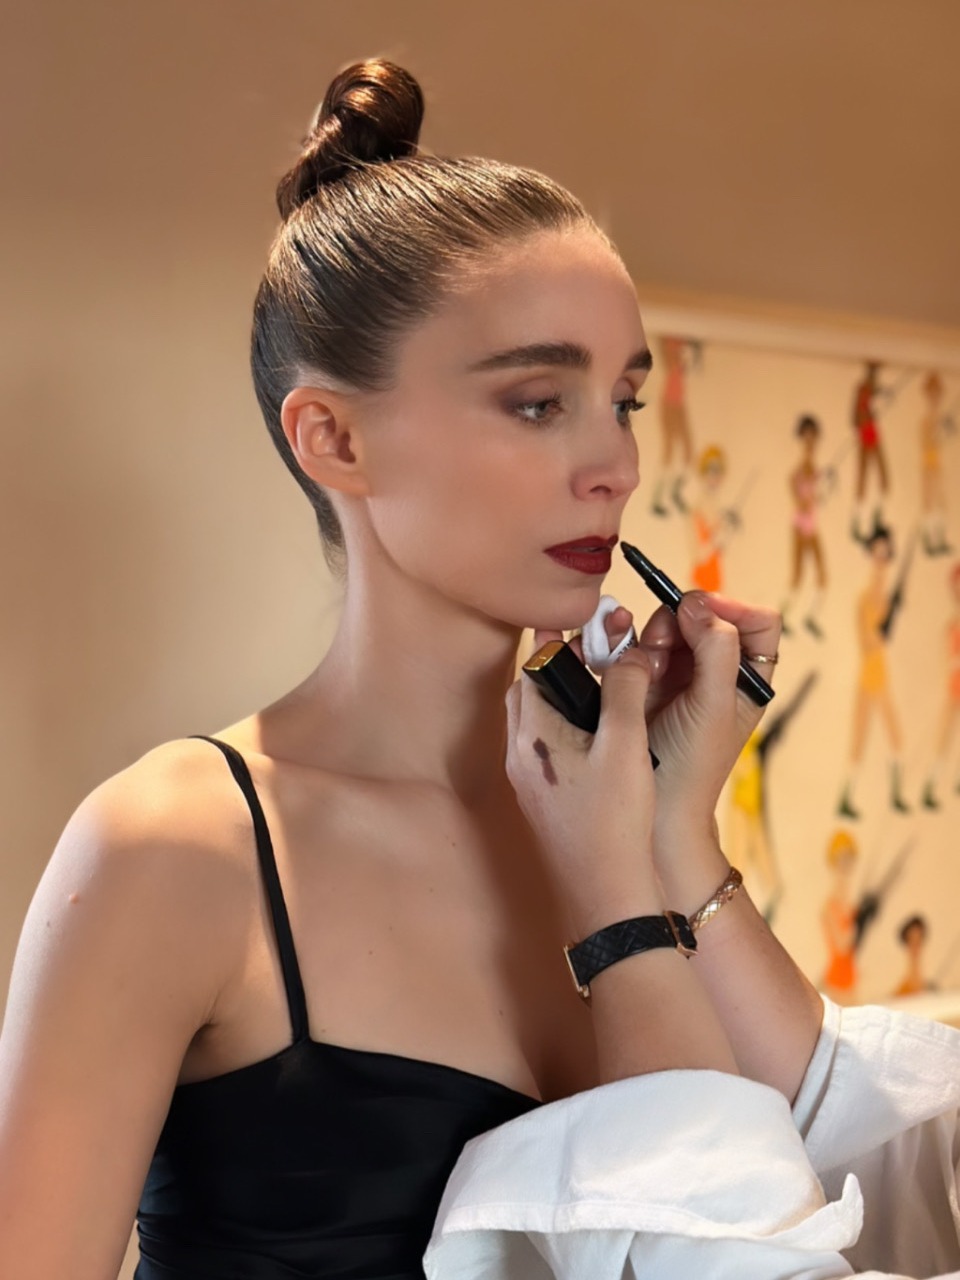 13 Best Chanel Makeup Products According to a Makeup Artist